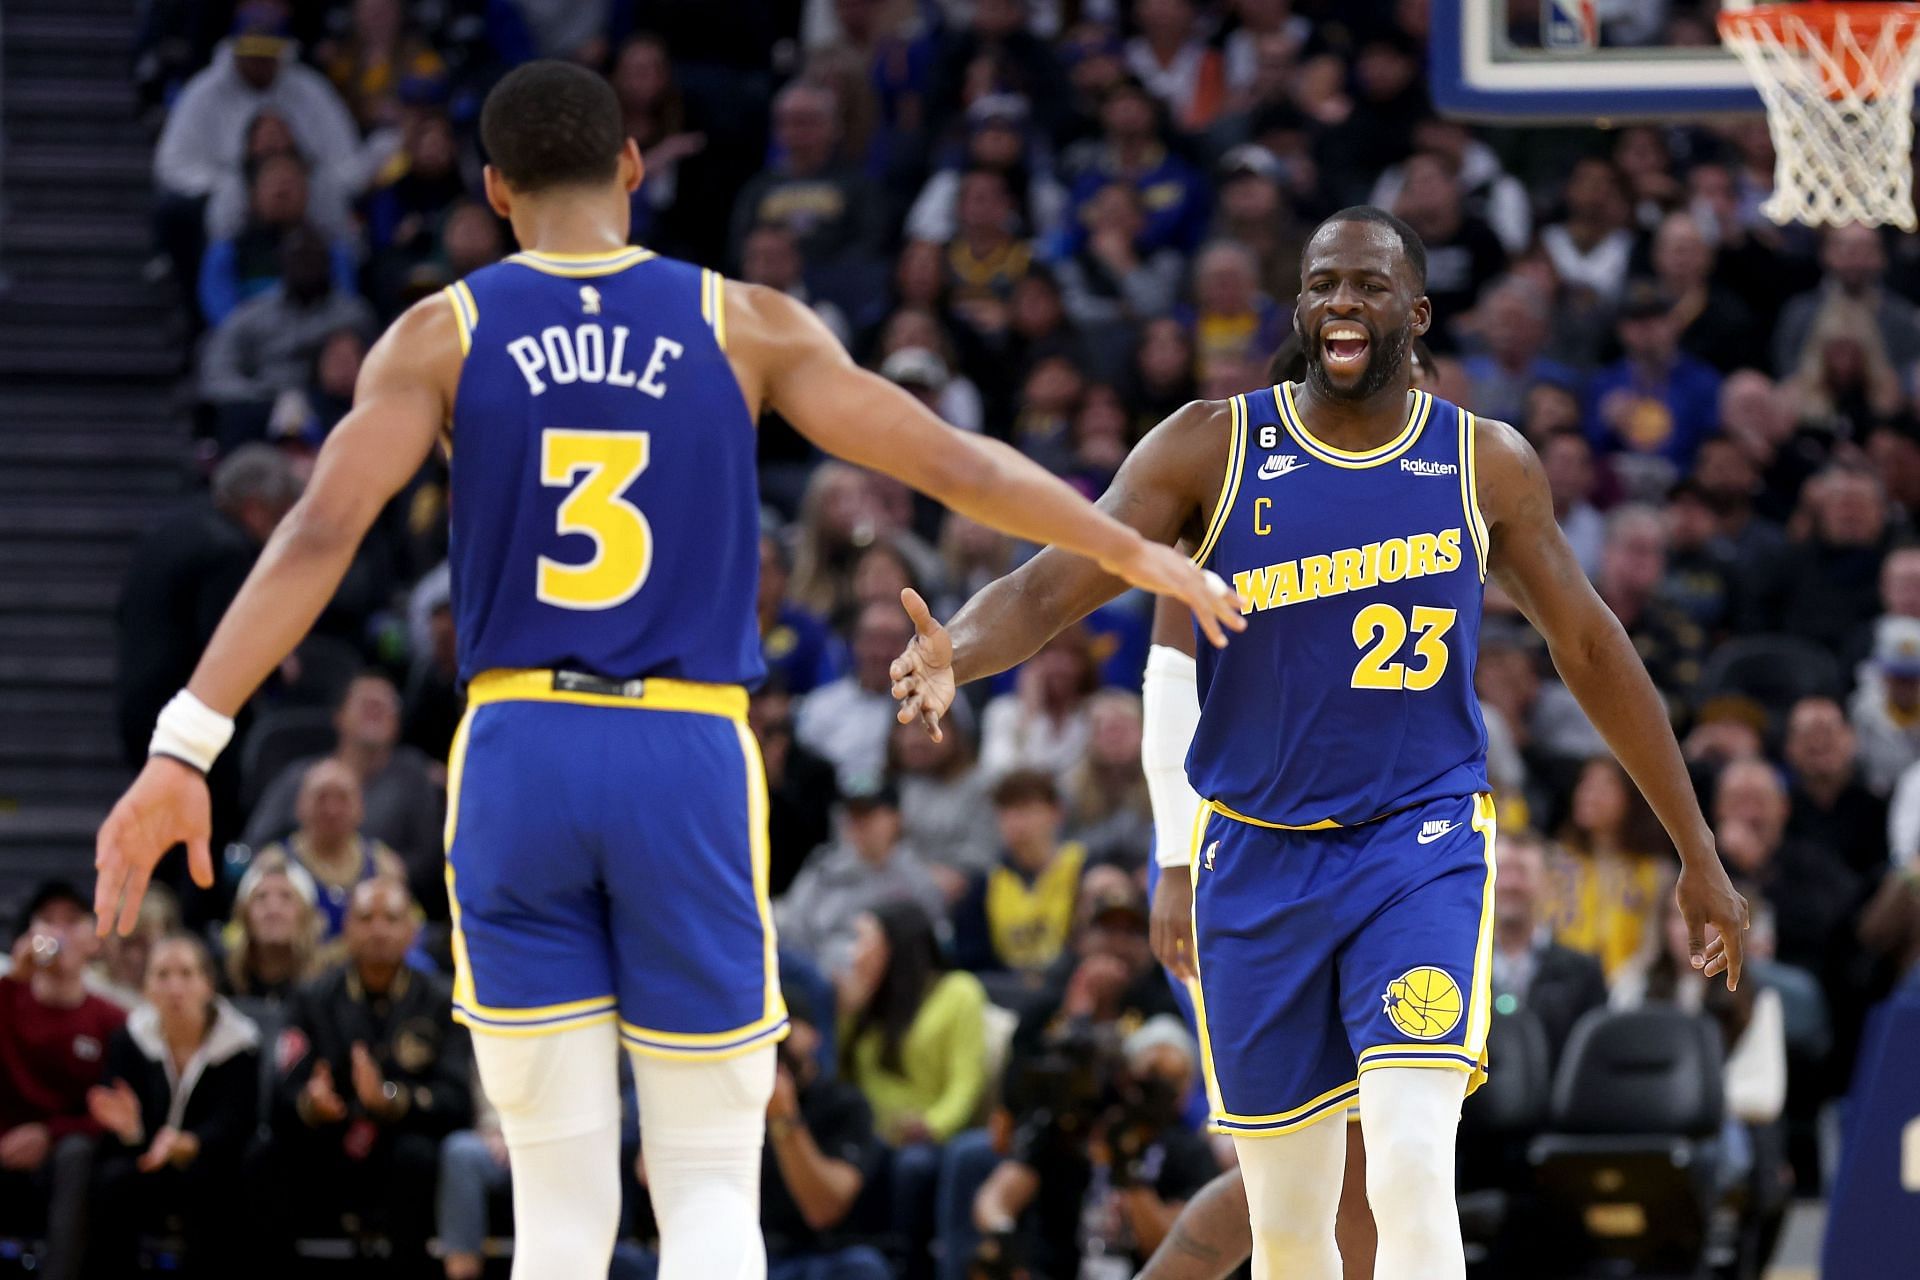 Jordan Poole (left) and Draymond Green of the Golden State Warriors